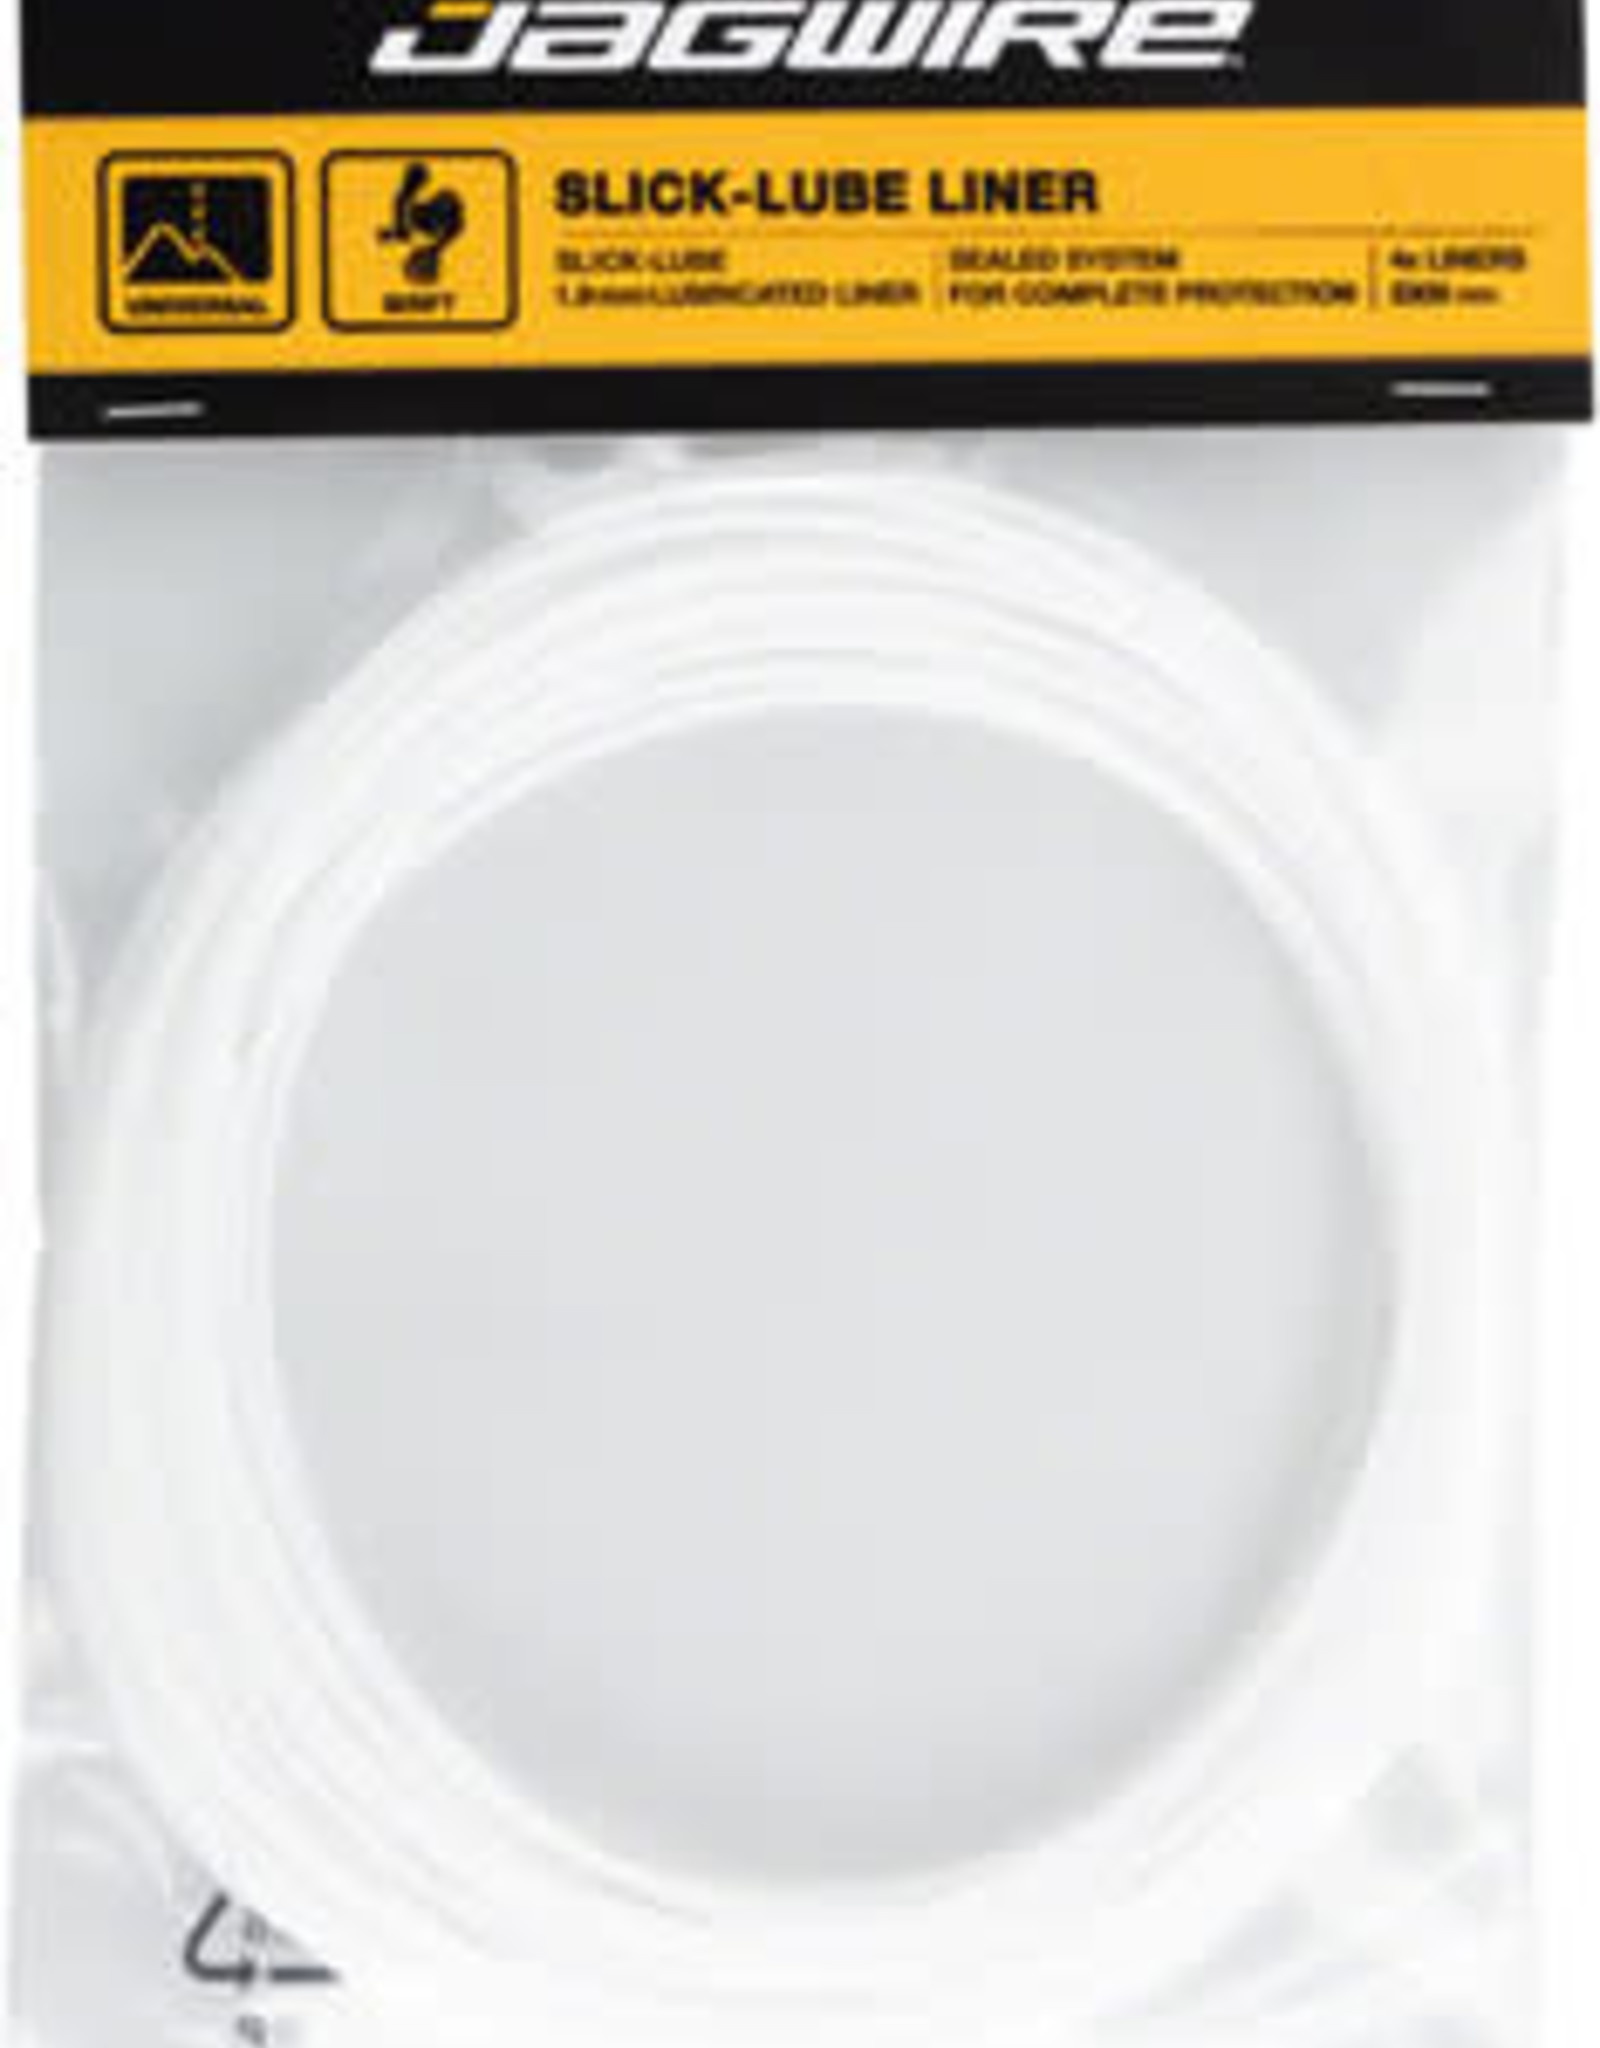 JAGWIRE Jagwire Slick-Lube Liner for Elite Sealed Shift Housing Kit 1 X 2300mm